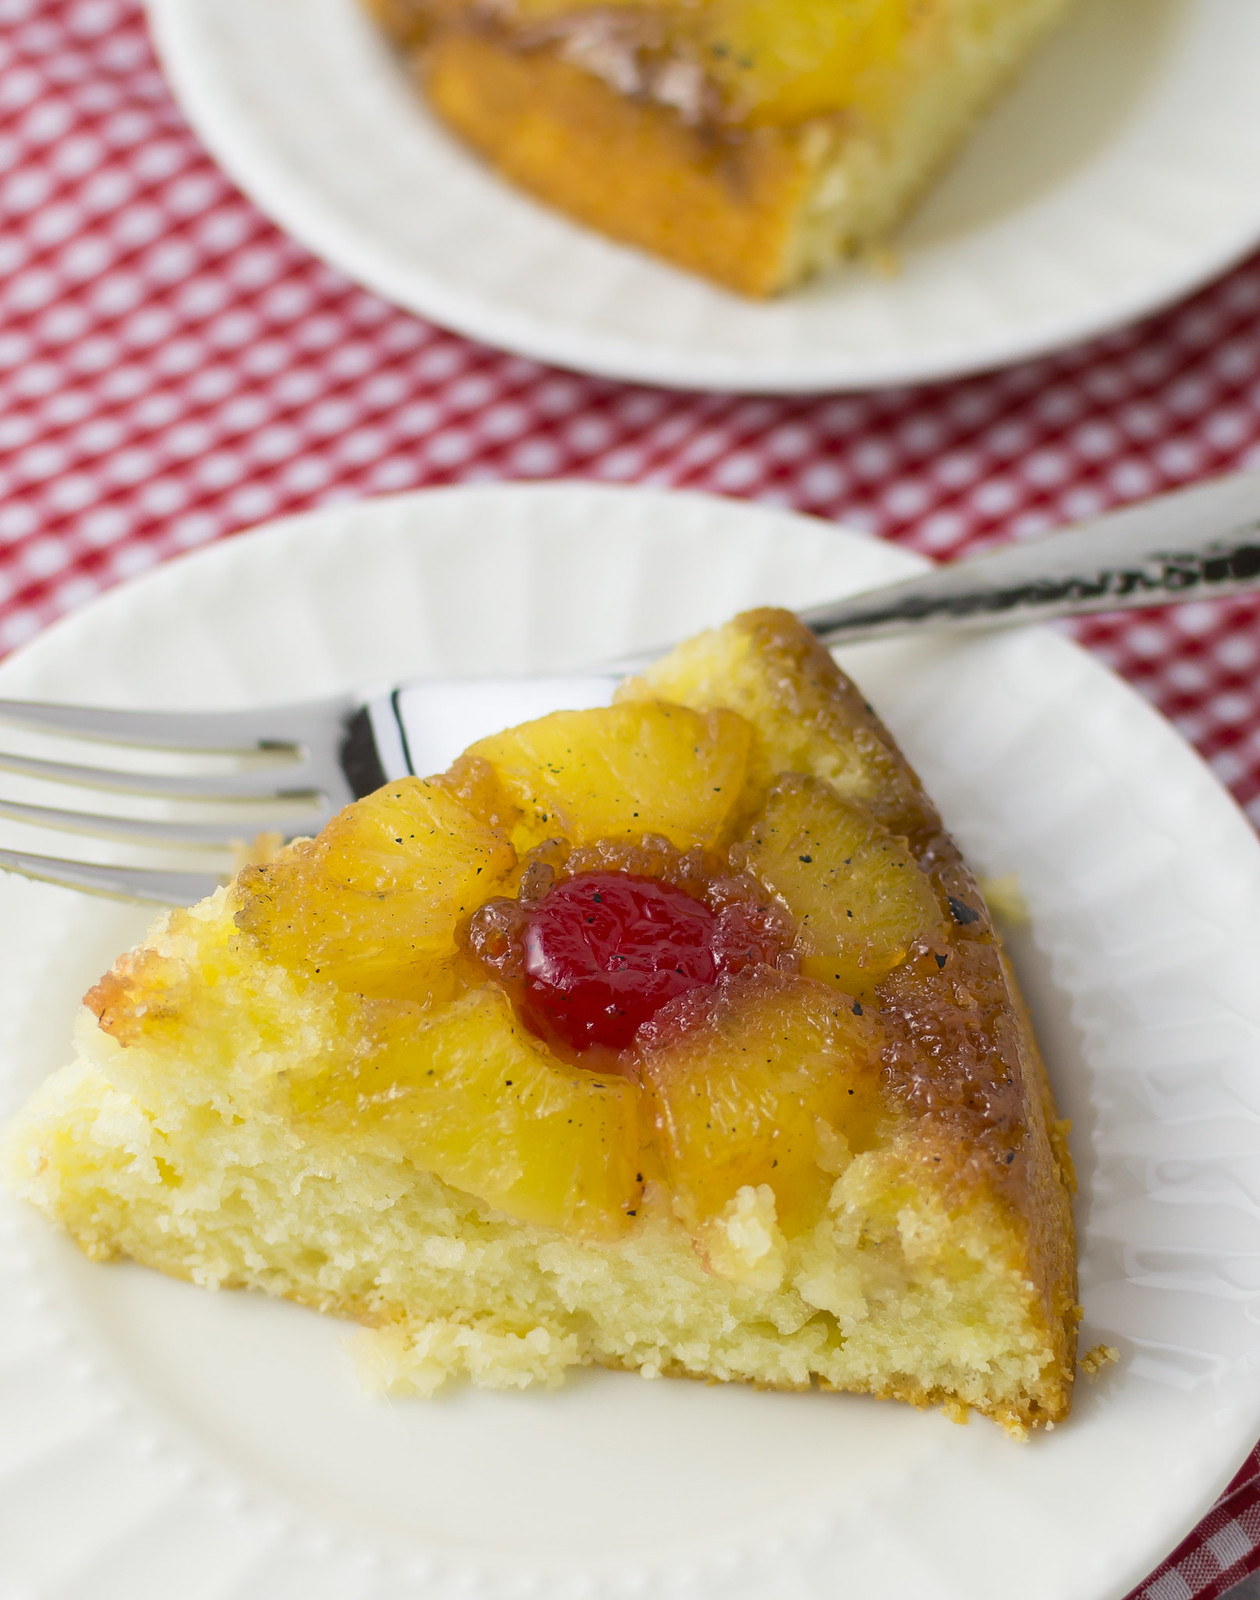 slice of prepared pineapple upside down cake on white plate with fork on red and white checkered napkin